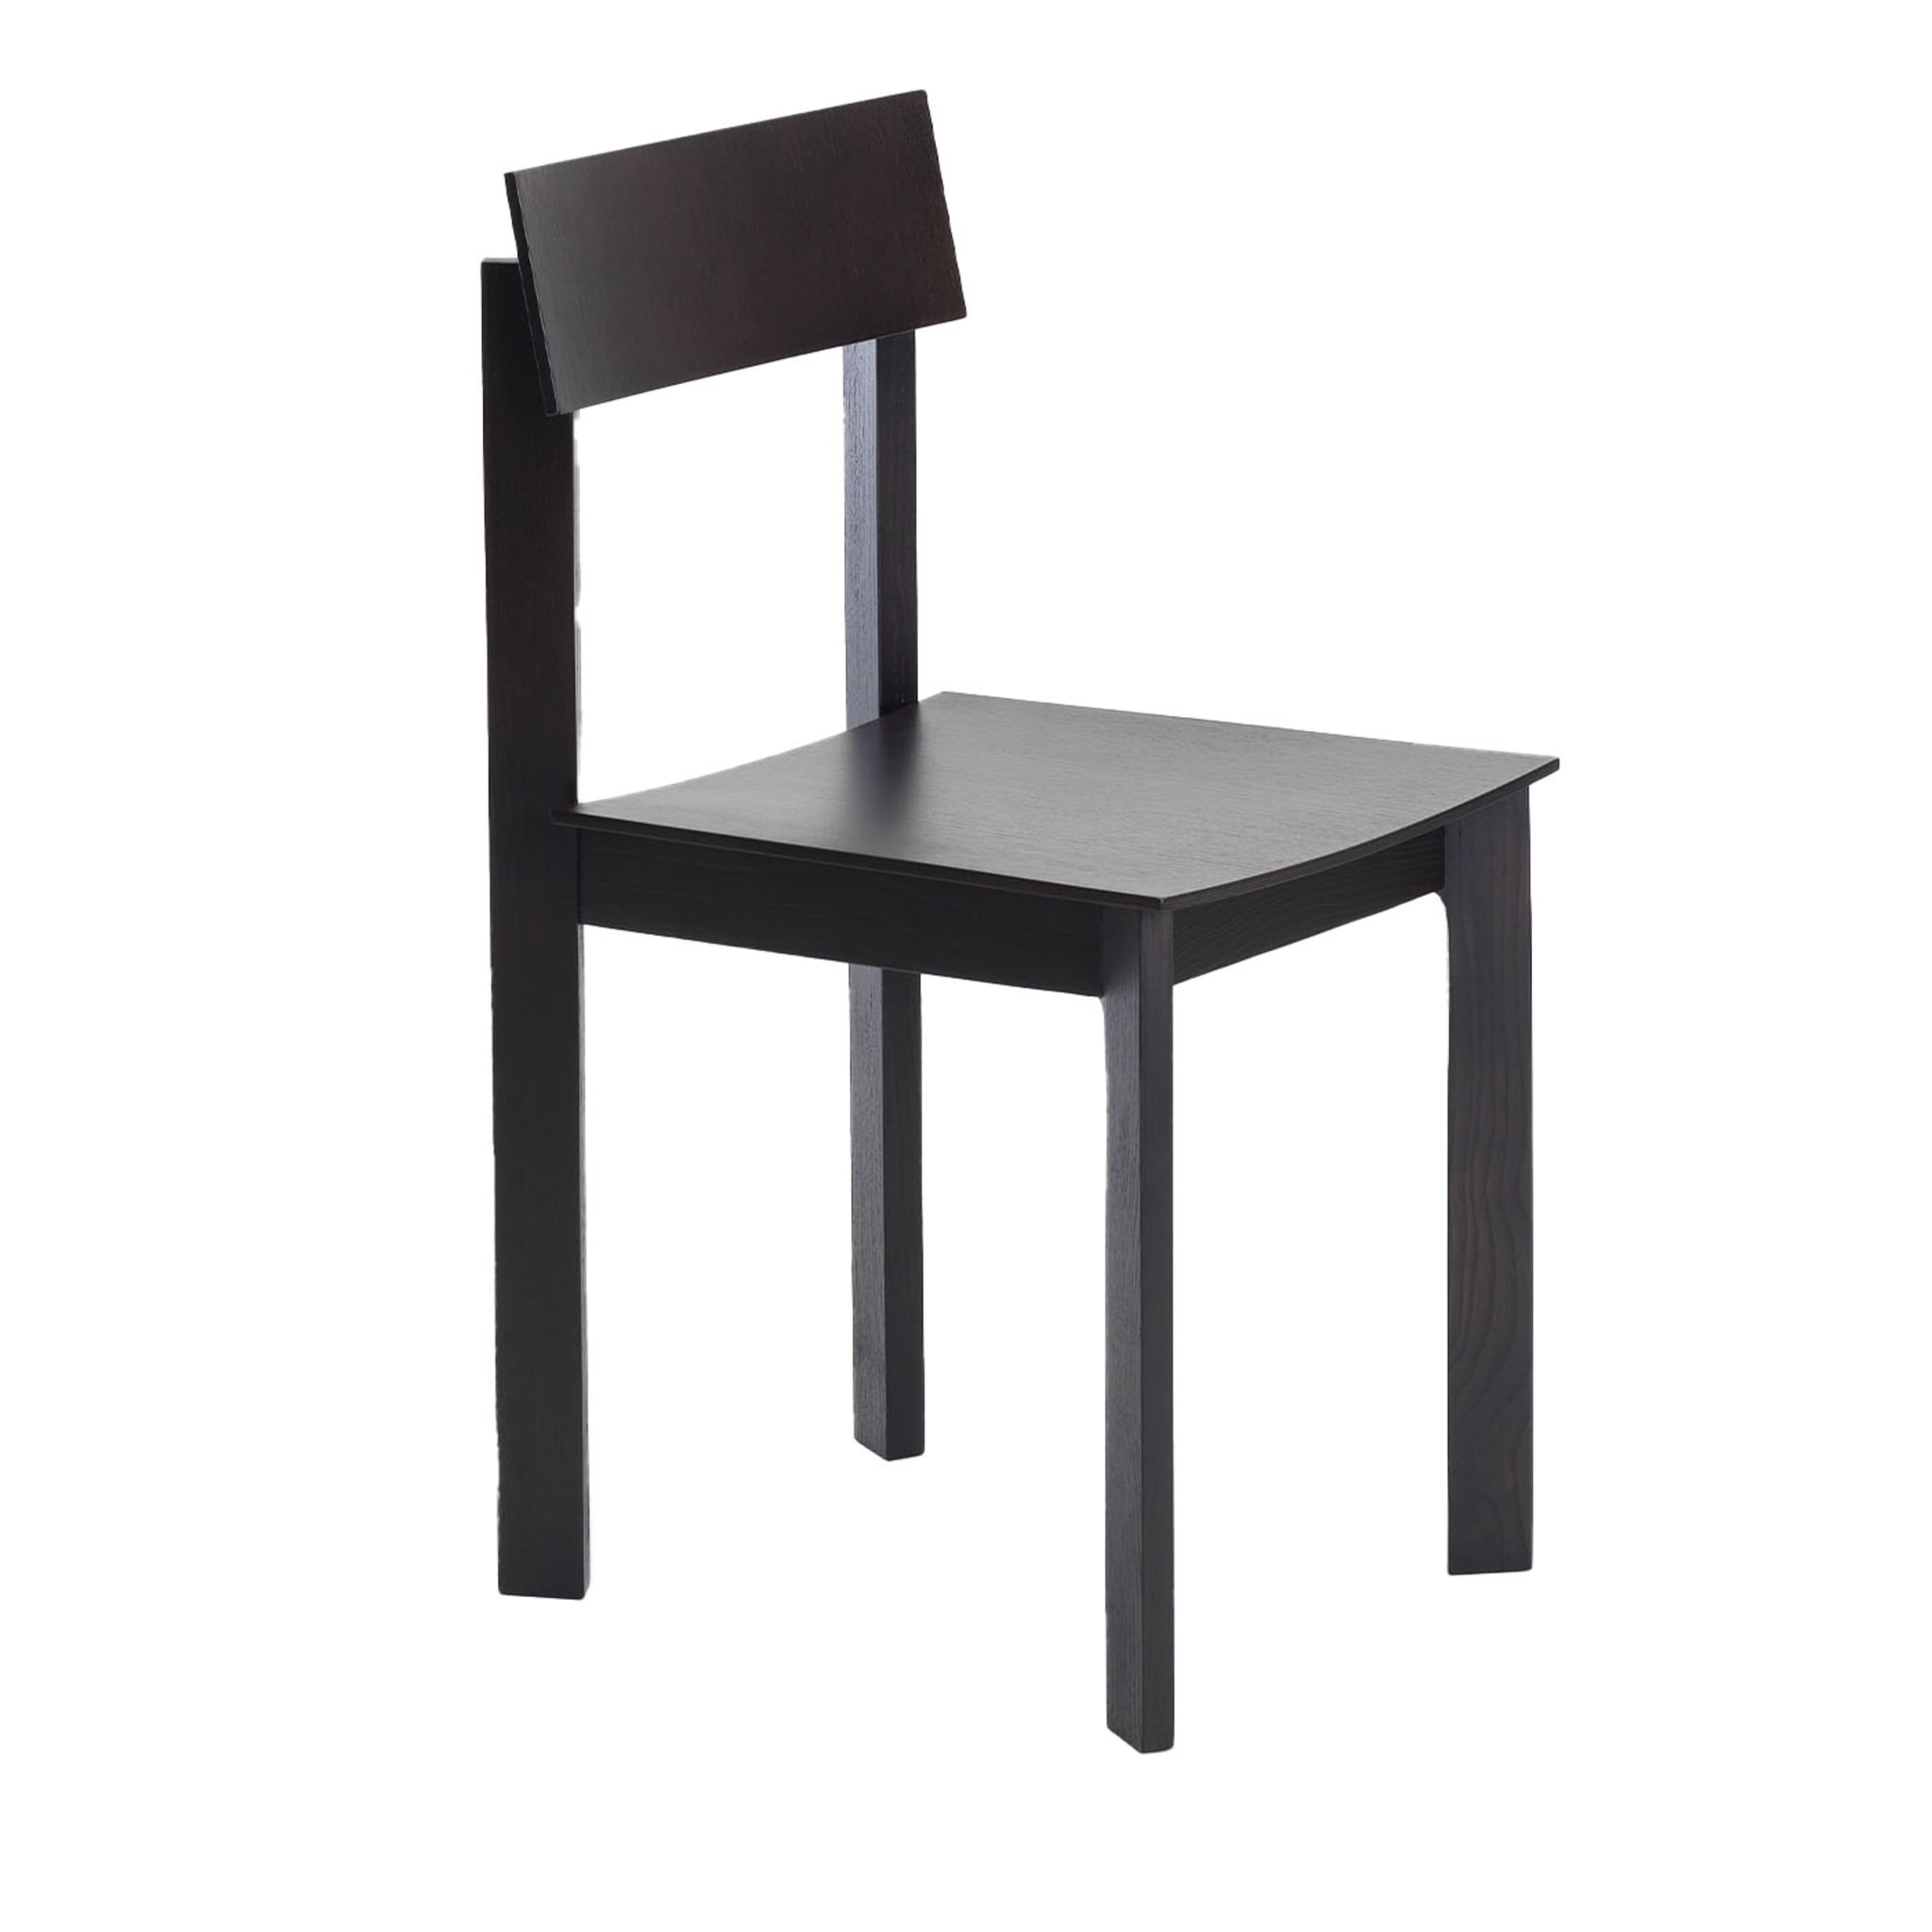 Set of 2 Upon Candid Black Chairs by Note Design Studio - Main view